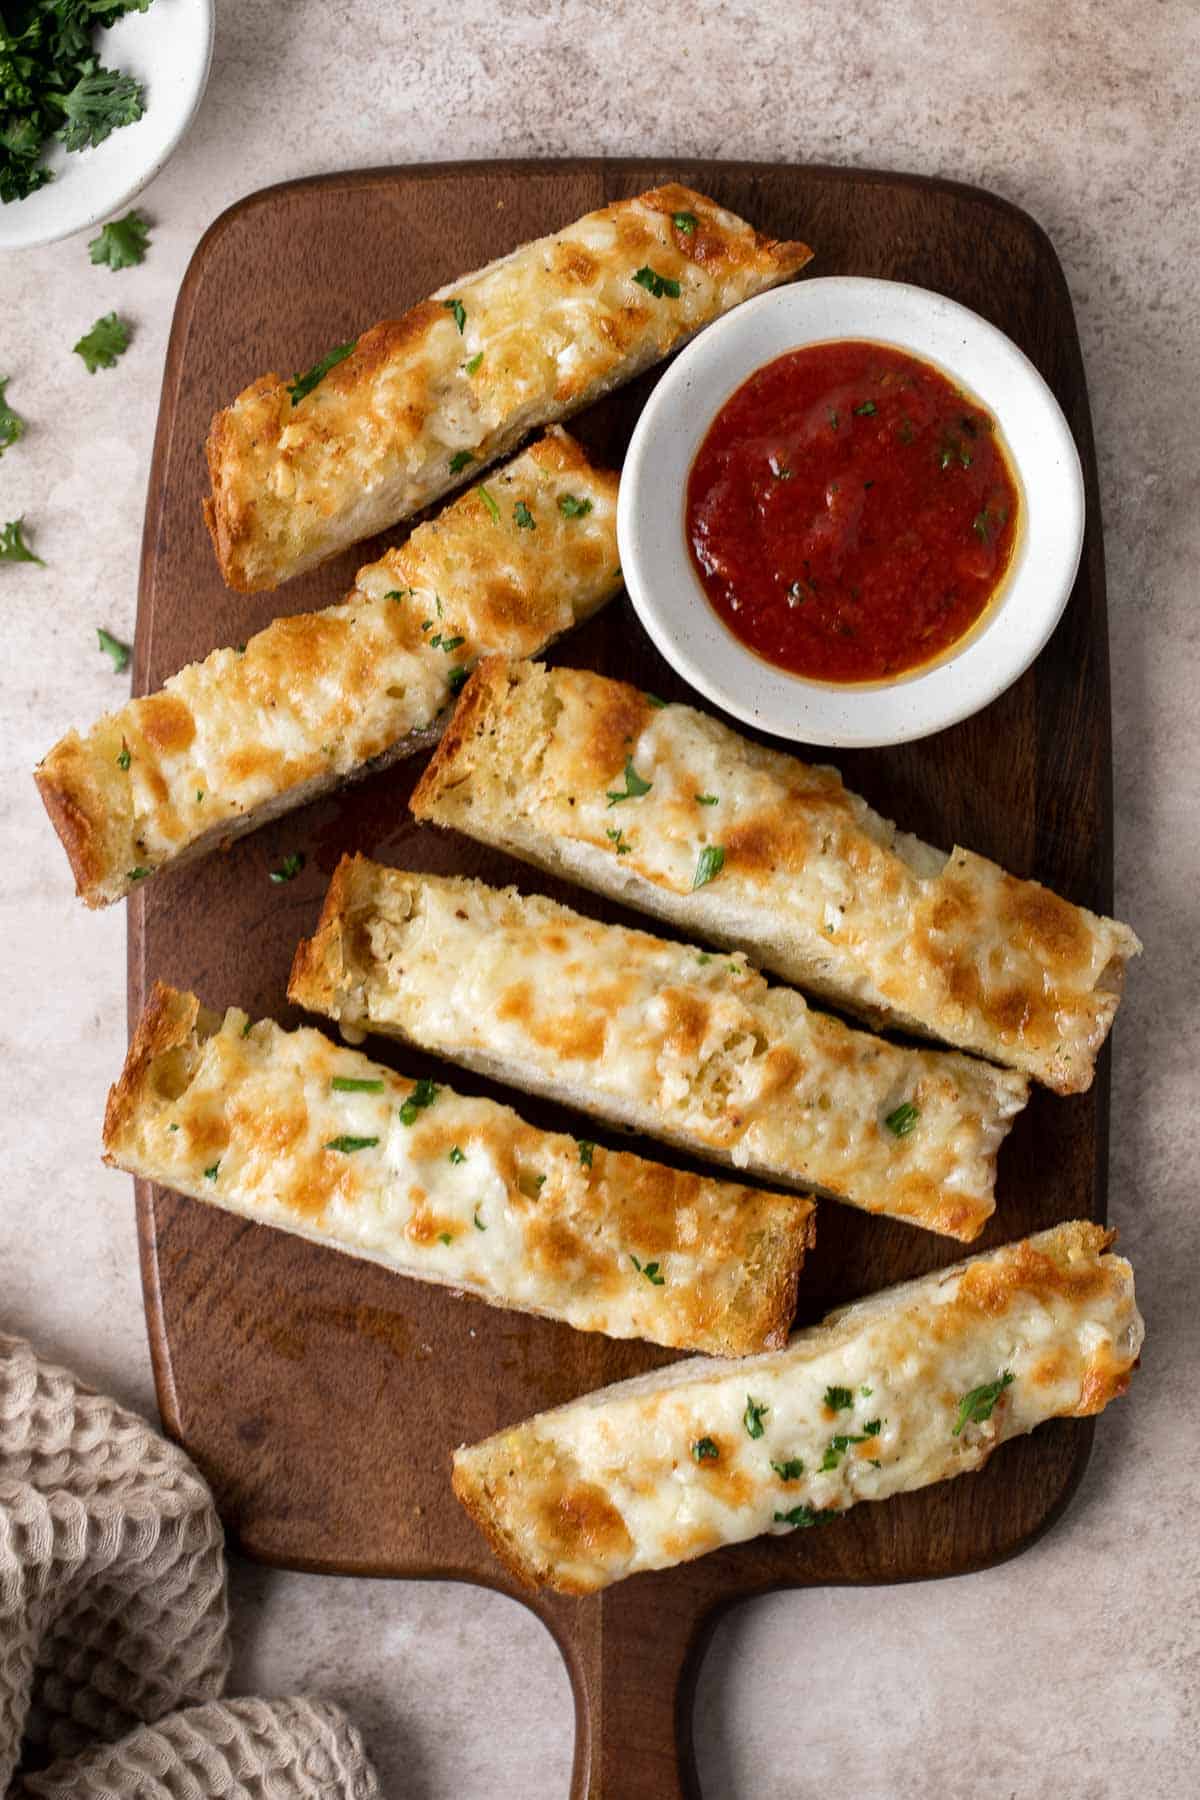 Cheesy Garlic Bread is toasty and crispy on the outside, tender and soft inside with a garlic butter and melty cheese on top. Make in under 20 minutes! | aheadofthyme.com